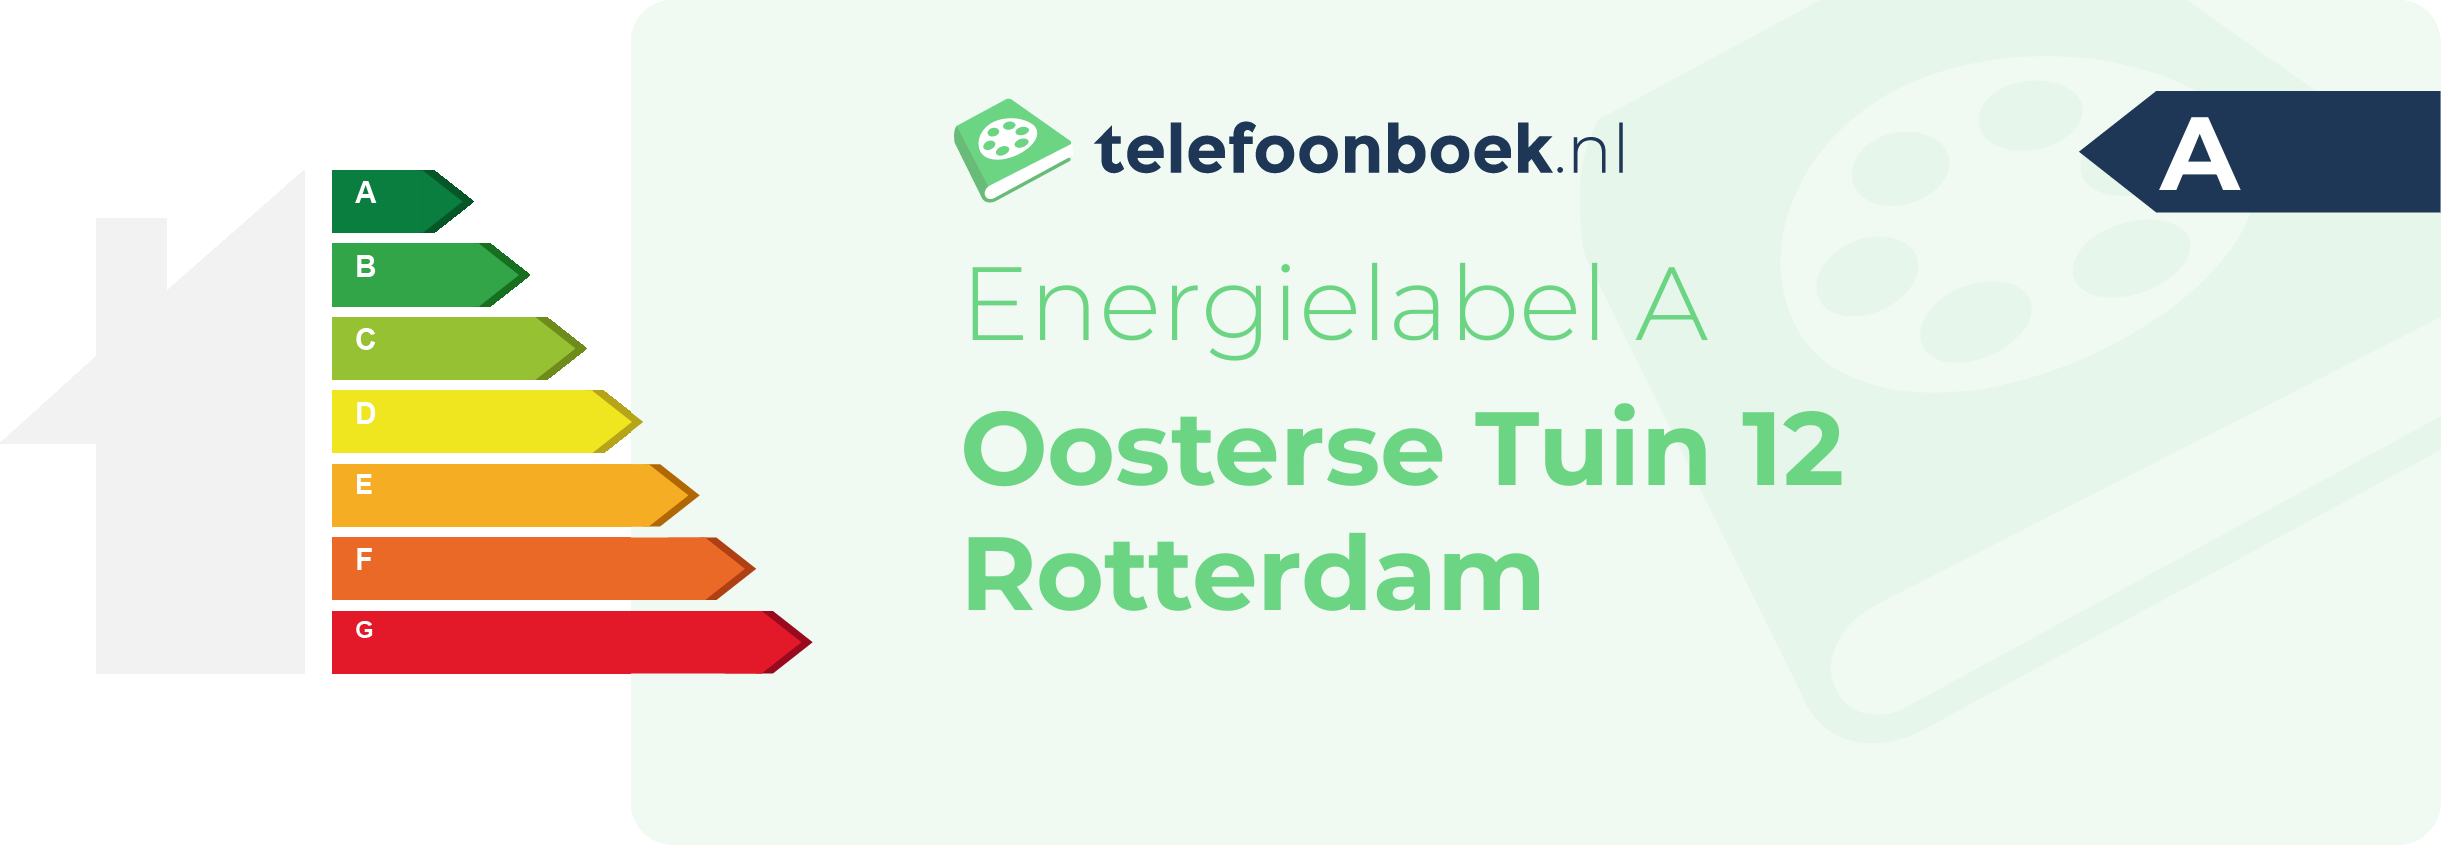 Energielabel Oosterse Tuin 12 Rotterdam